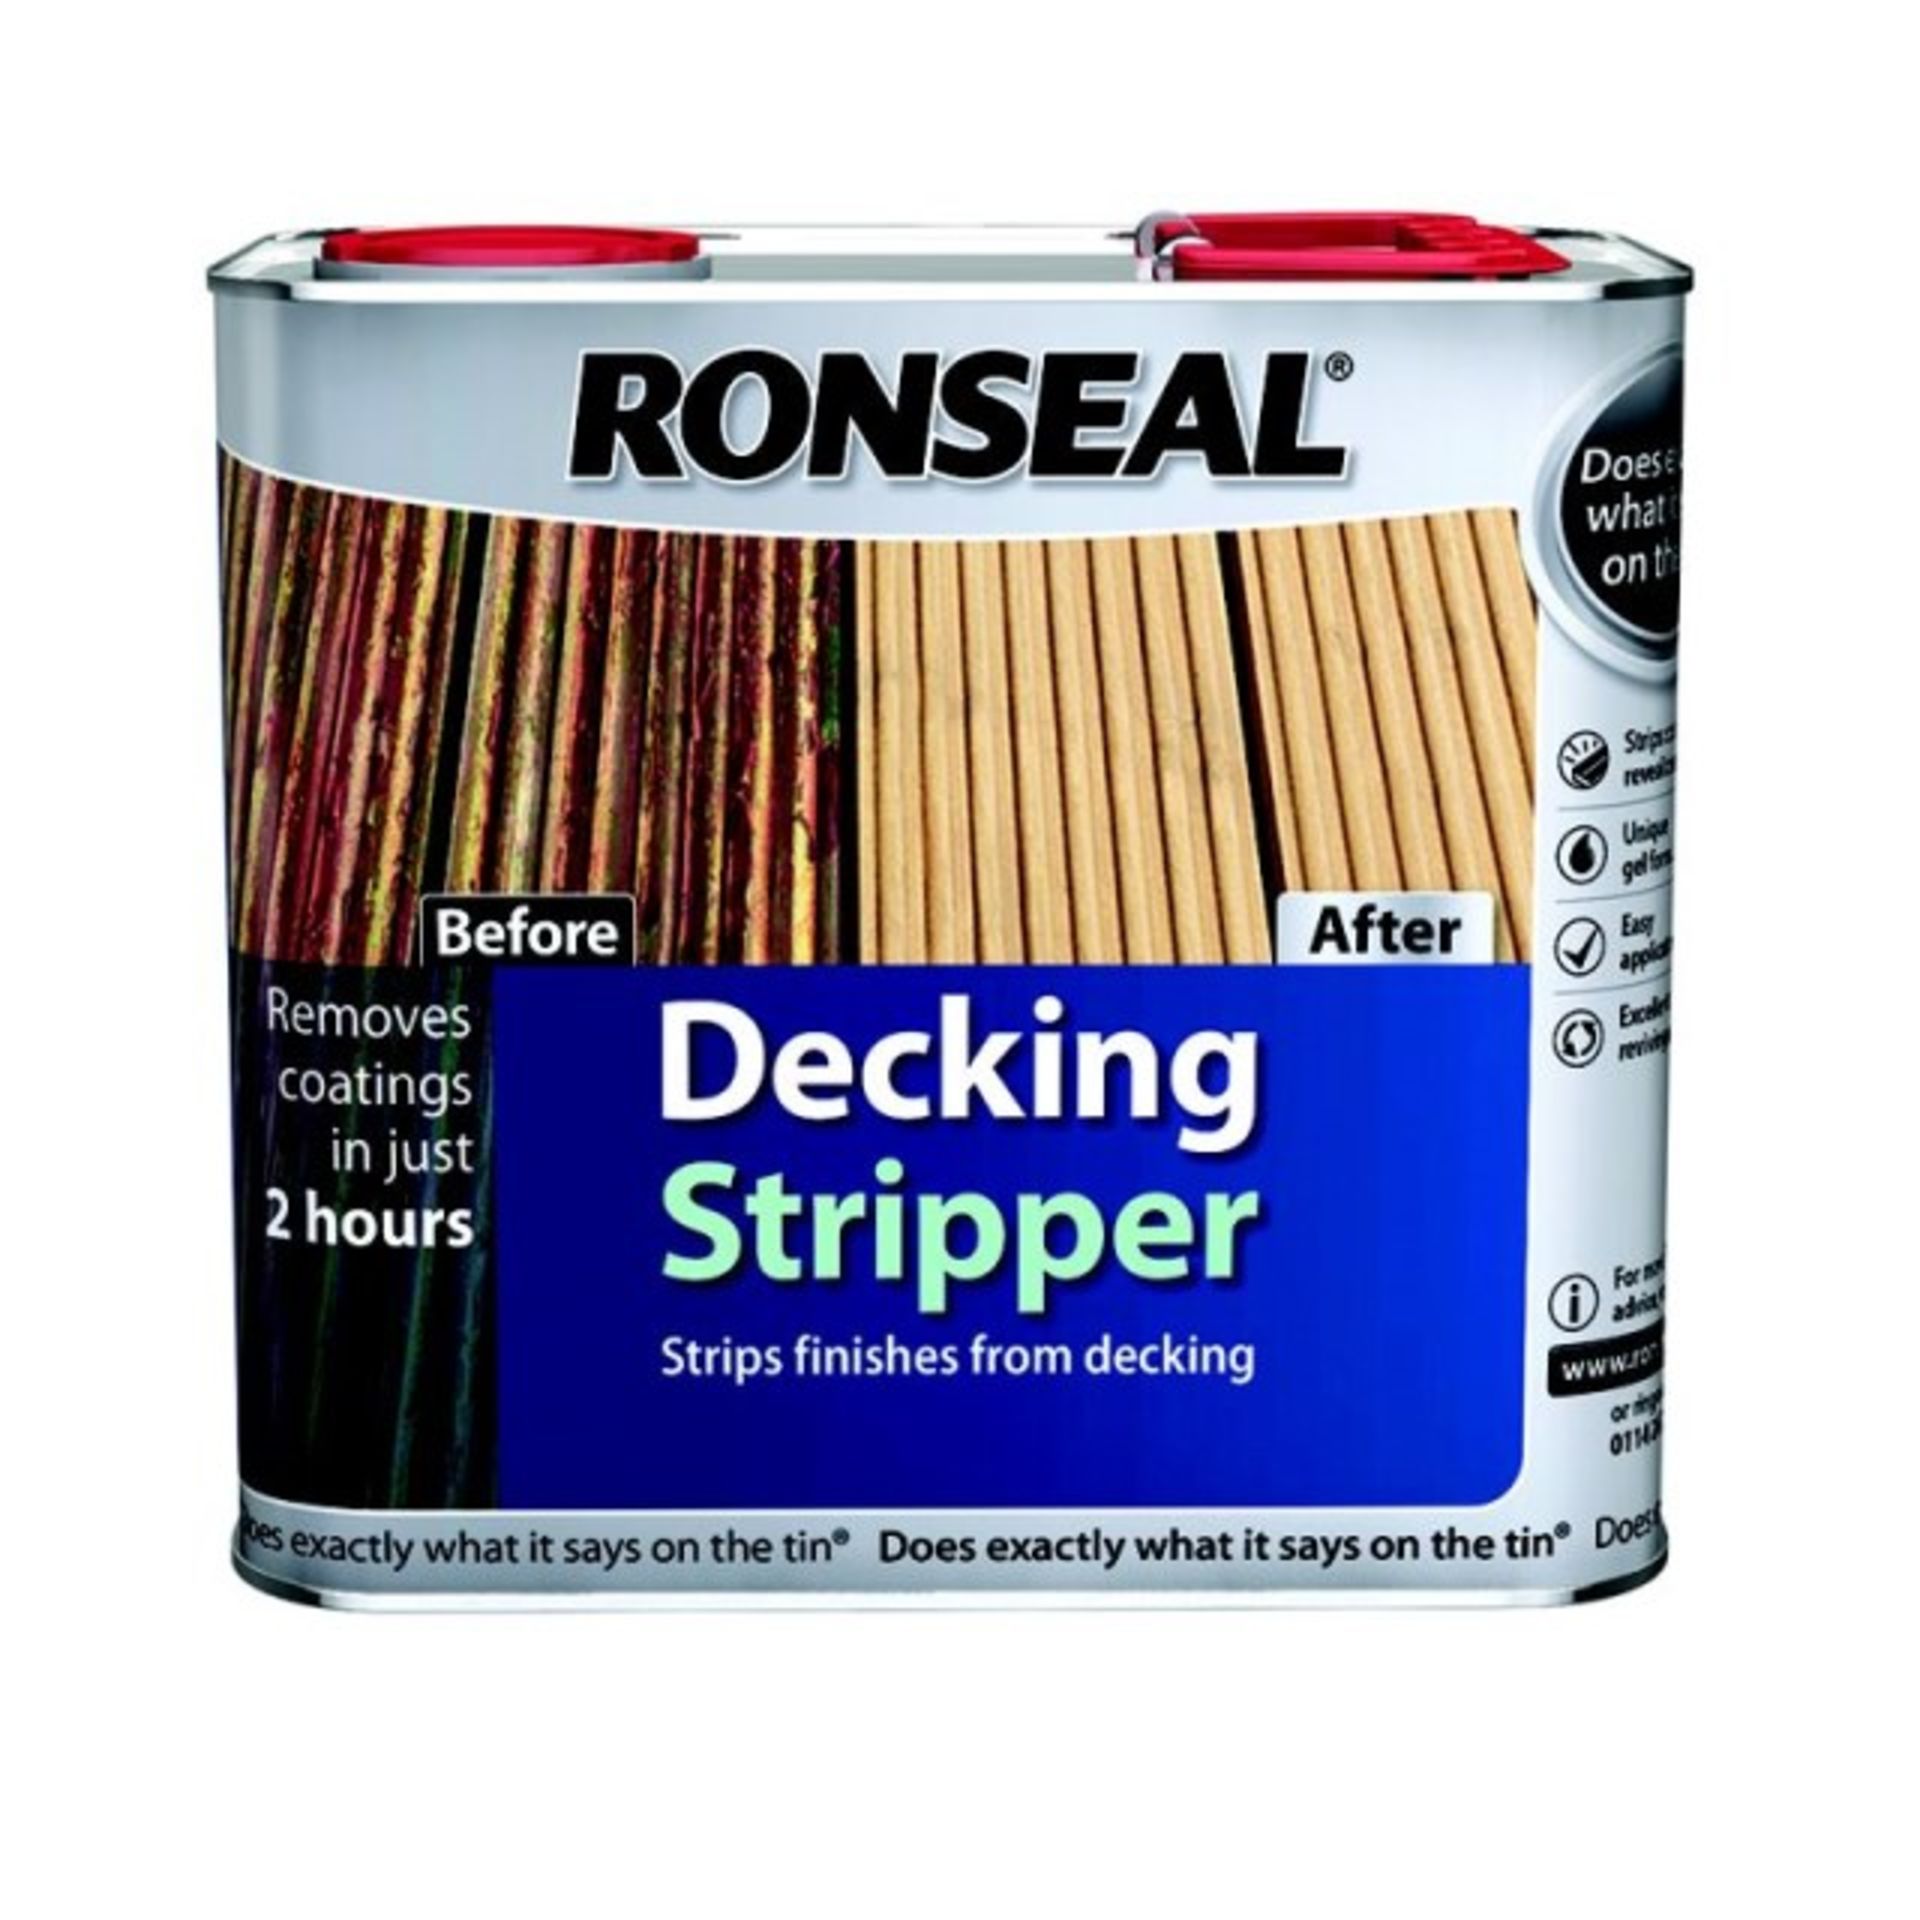 V Grade U Ronseal Decking Stripper 2.5 Litres X 2 YOUR BID PRICE TO BE MULTIPLIED BY TWO